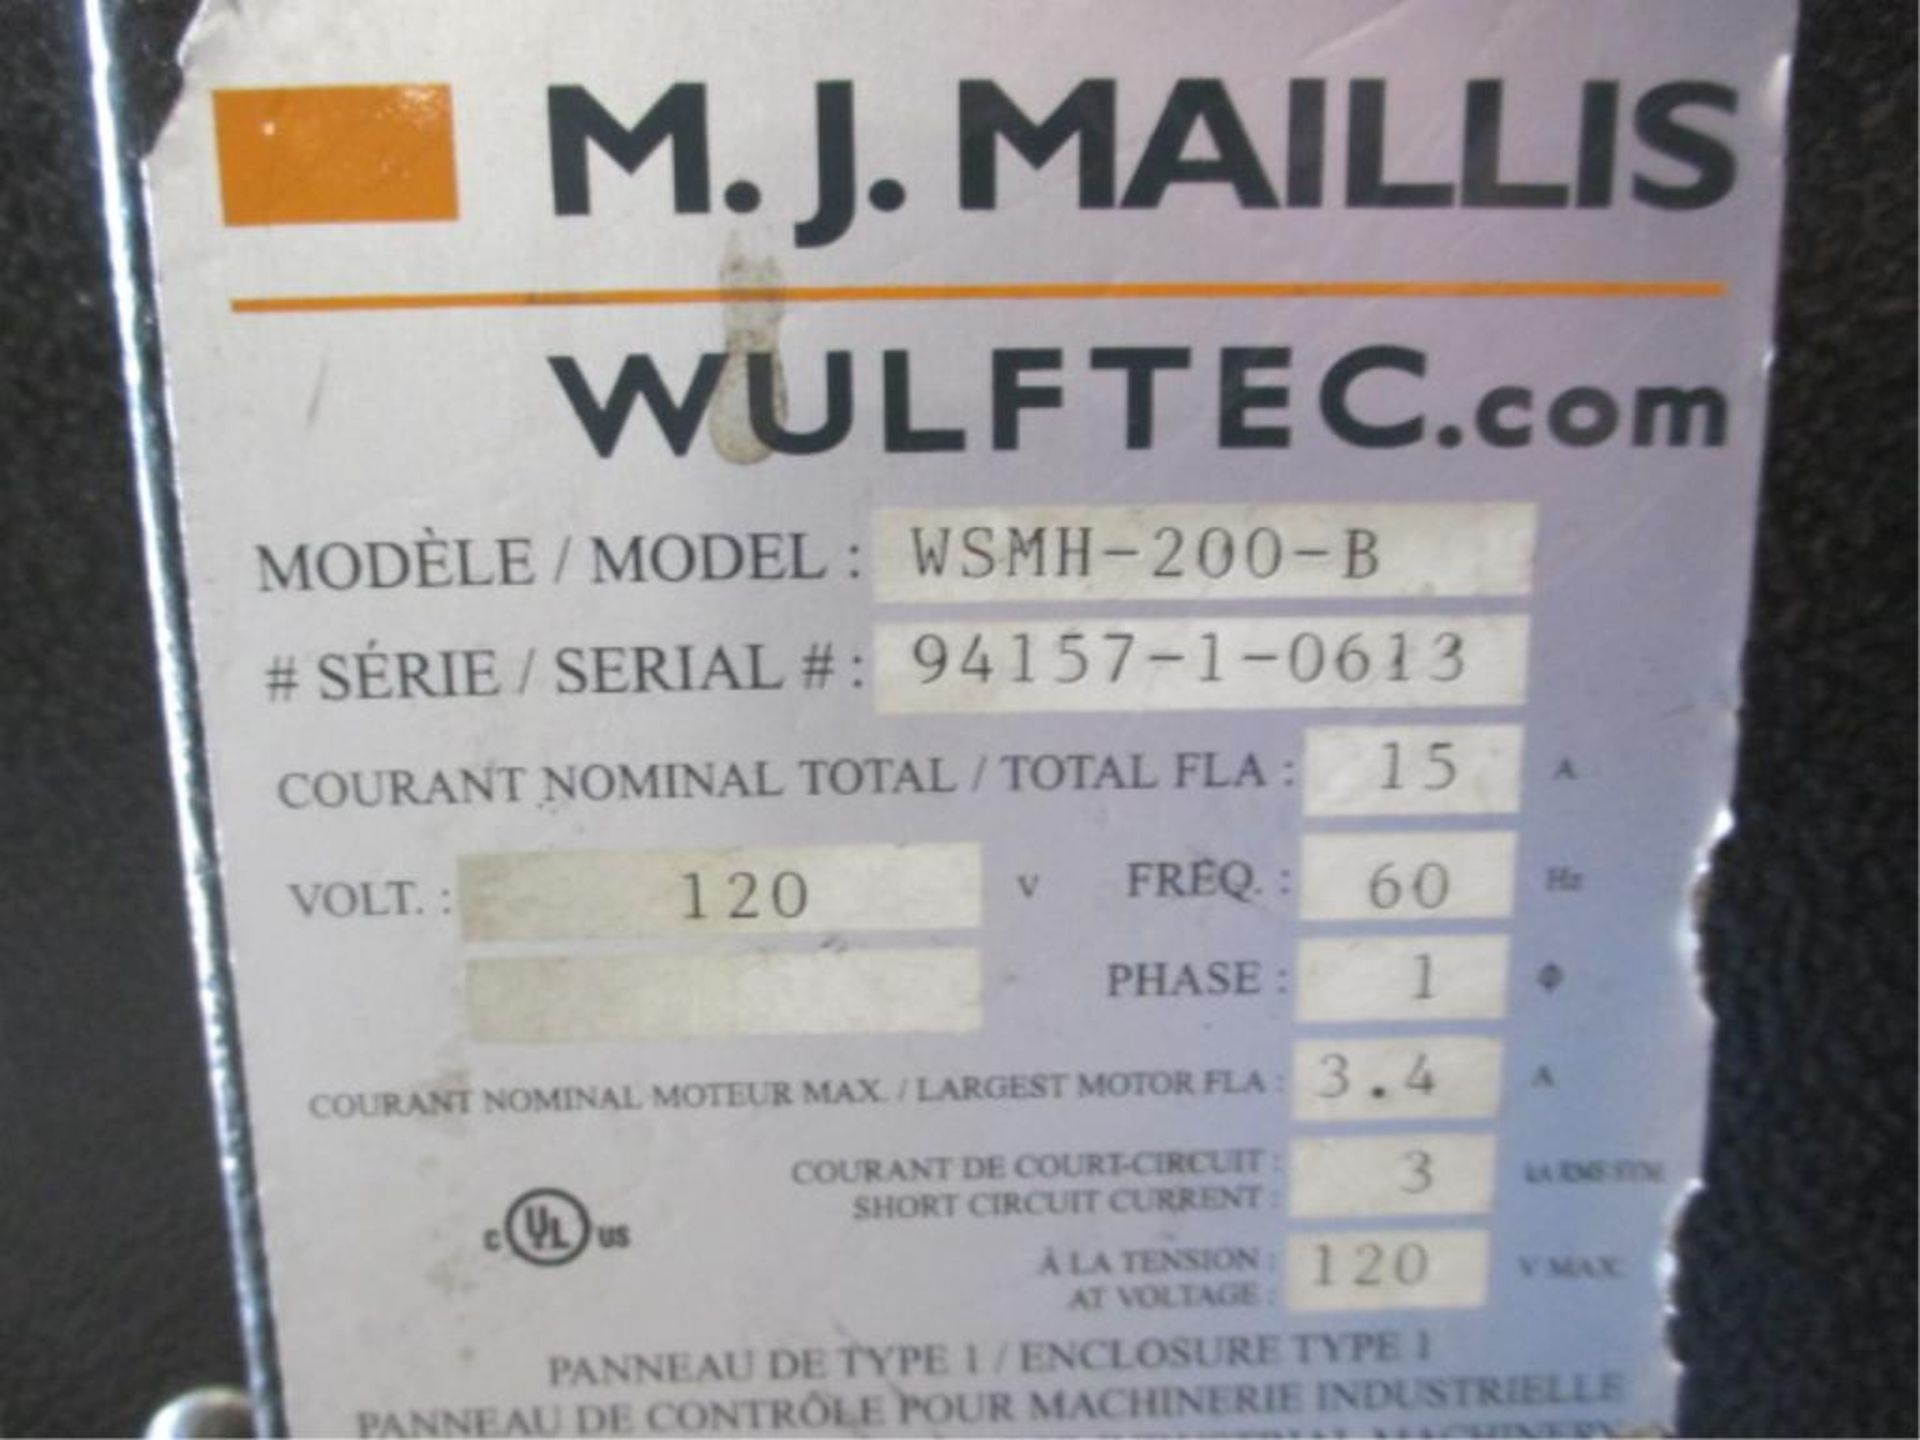 Wulftec / M.J. Maillis WSMH-200-B Semi-Automatic Turntable Stretch Wrapper. 120V, 60Hz, 15A. S/N- - Image 4 of 4